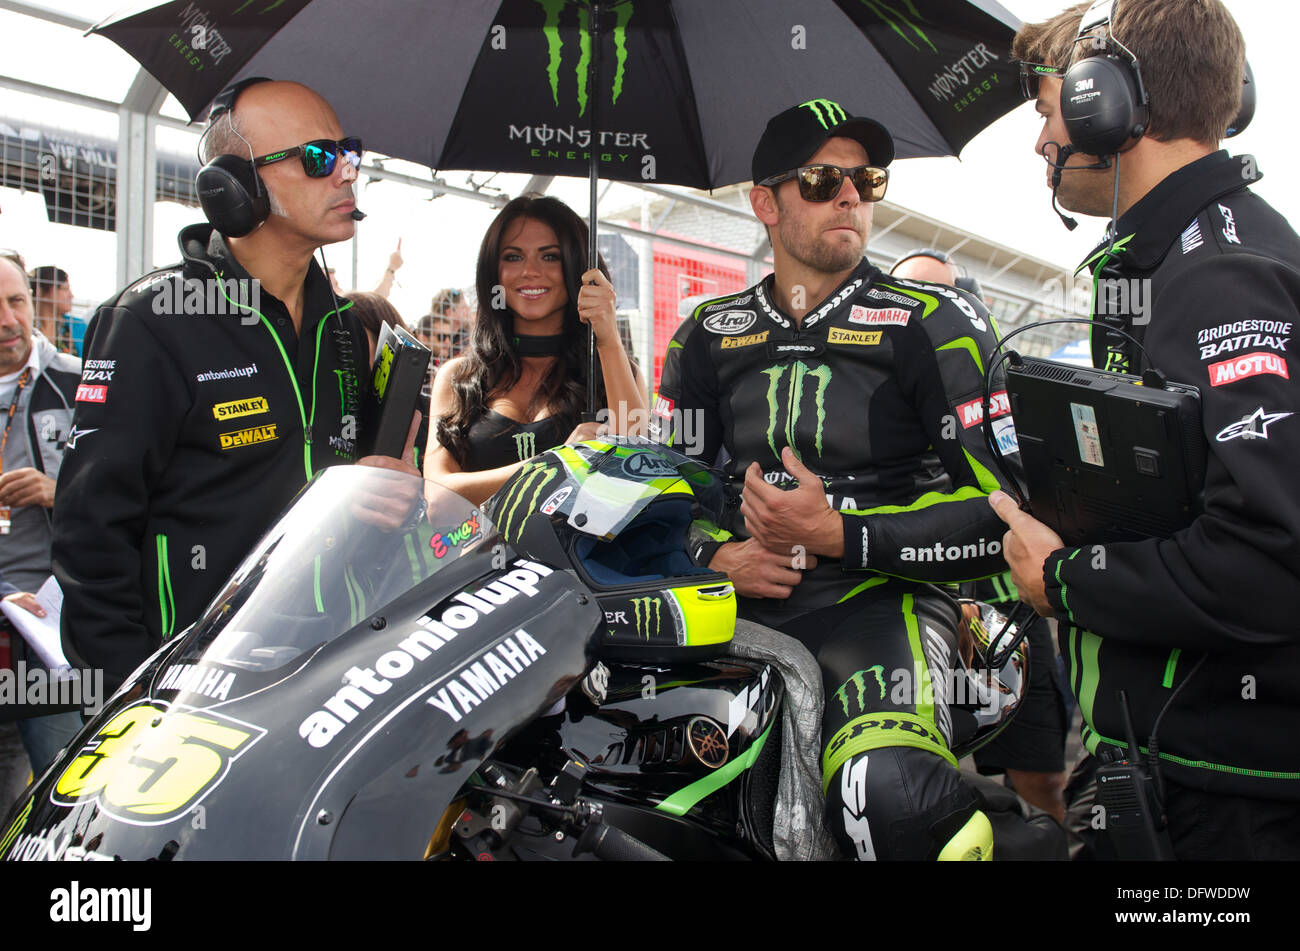 Photo Collection Monster Energy Motogp Motor